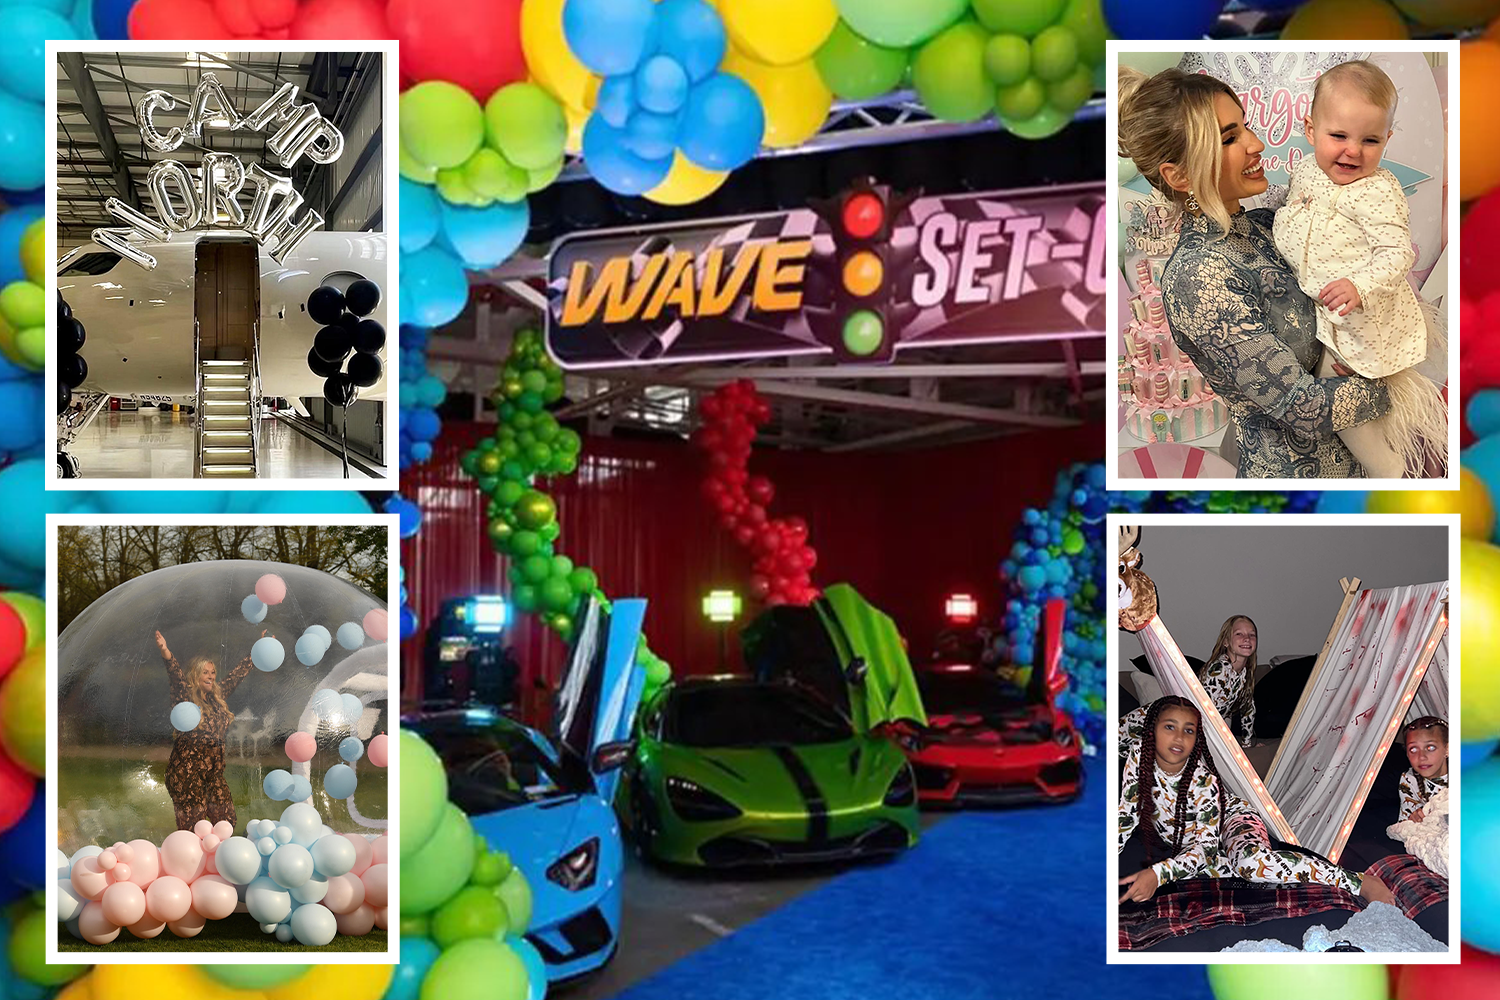 From private jets to 14 event planners - the battle of the celeb kids’ birthdays